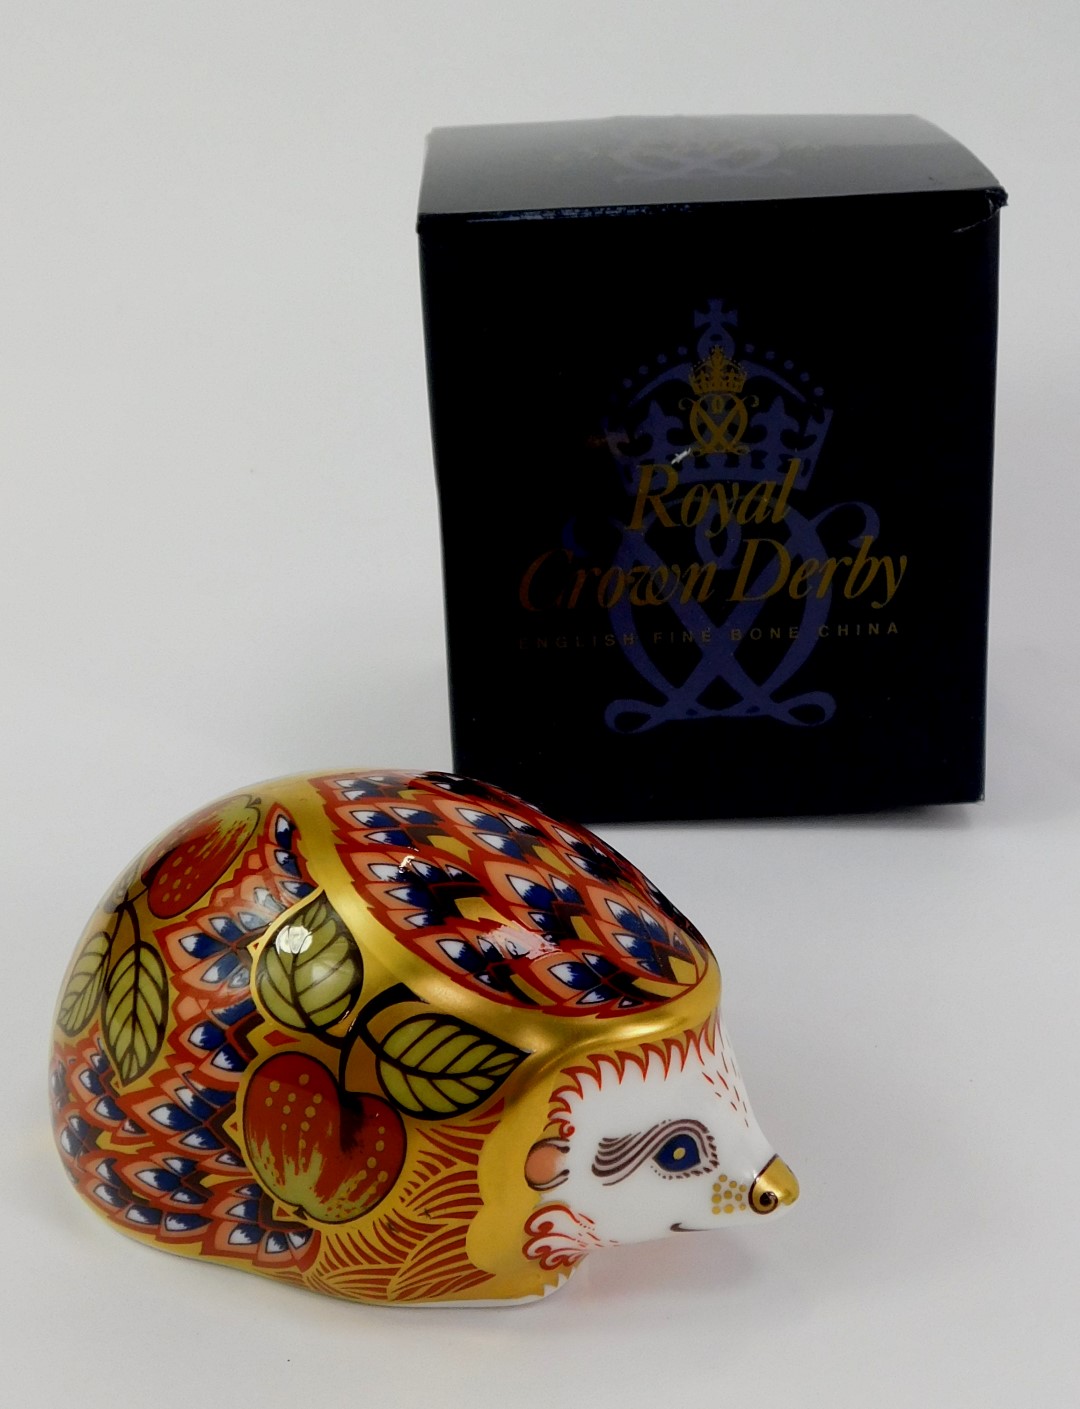 A Royal Crown Derby porcelain orchard hedgehog paperweight, an exclusive for the Royal Crown Derby - Image 2 of 3